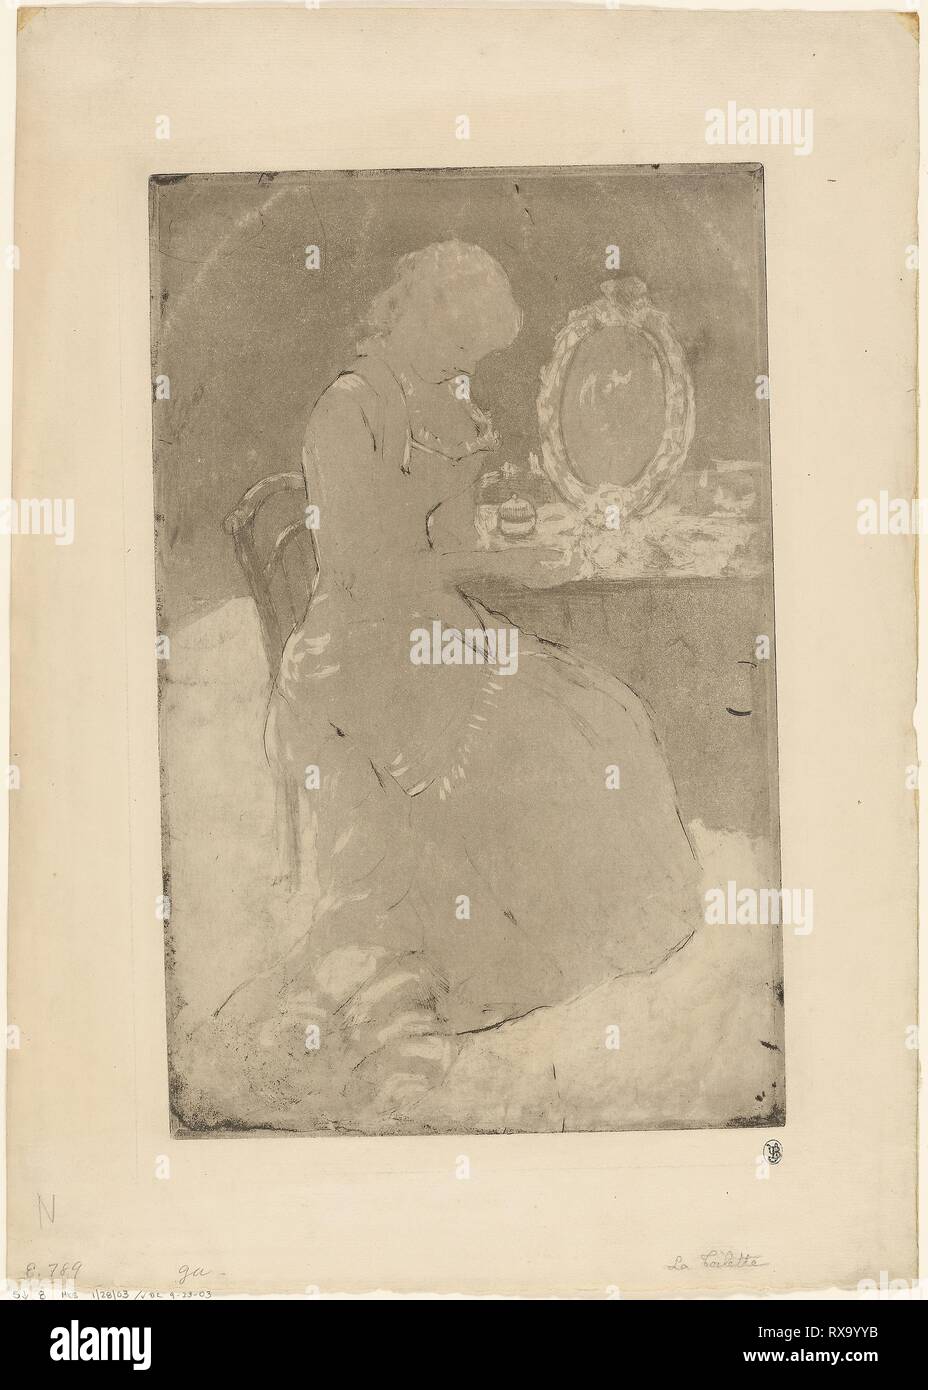 At the Dressing Table. Mary Cassatt; American, 1844-1926. Date: 1880. Dimensions: 321 x 209 mm (image); 349 x 228 mm (plate); 431 x 308 mm (sheet). Soft ground and aquatint on cream wove paper. Origin: United States. Museum: The Chicago Art Institute. Stock Photo